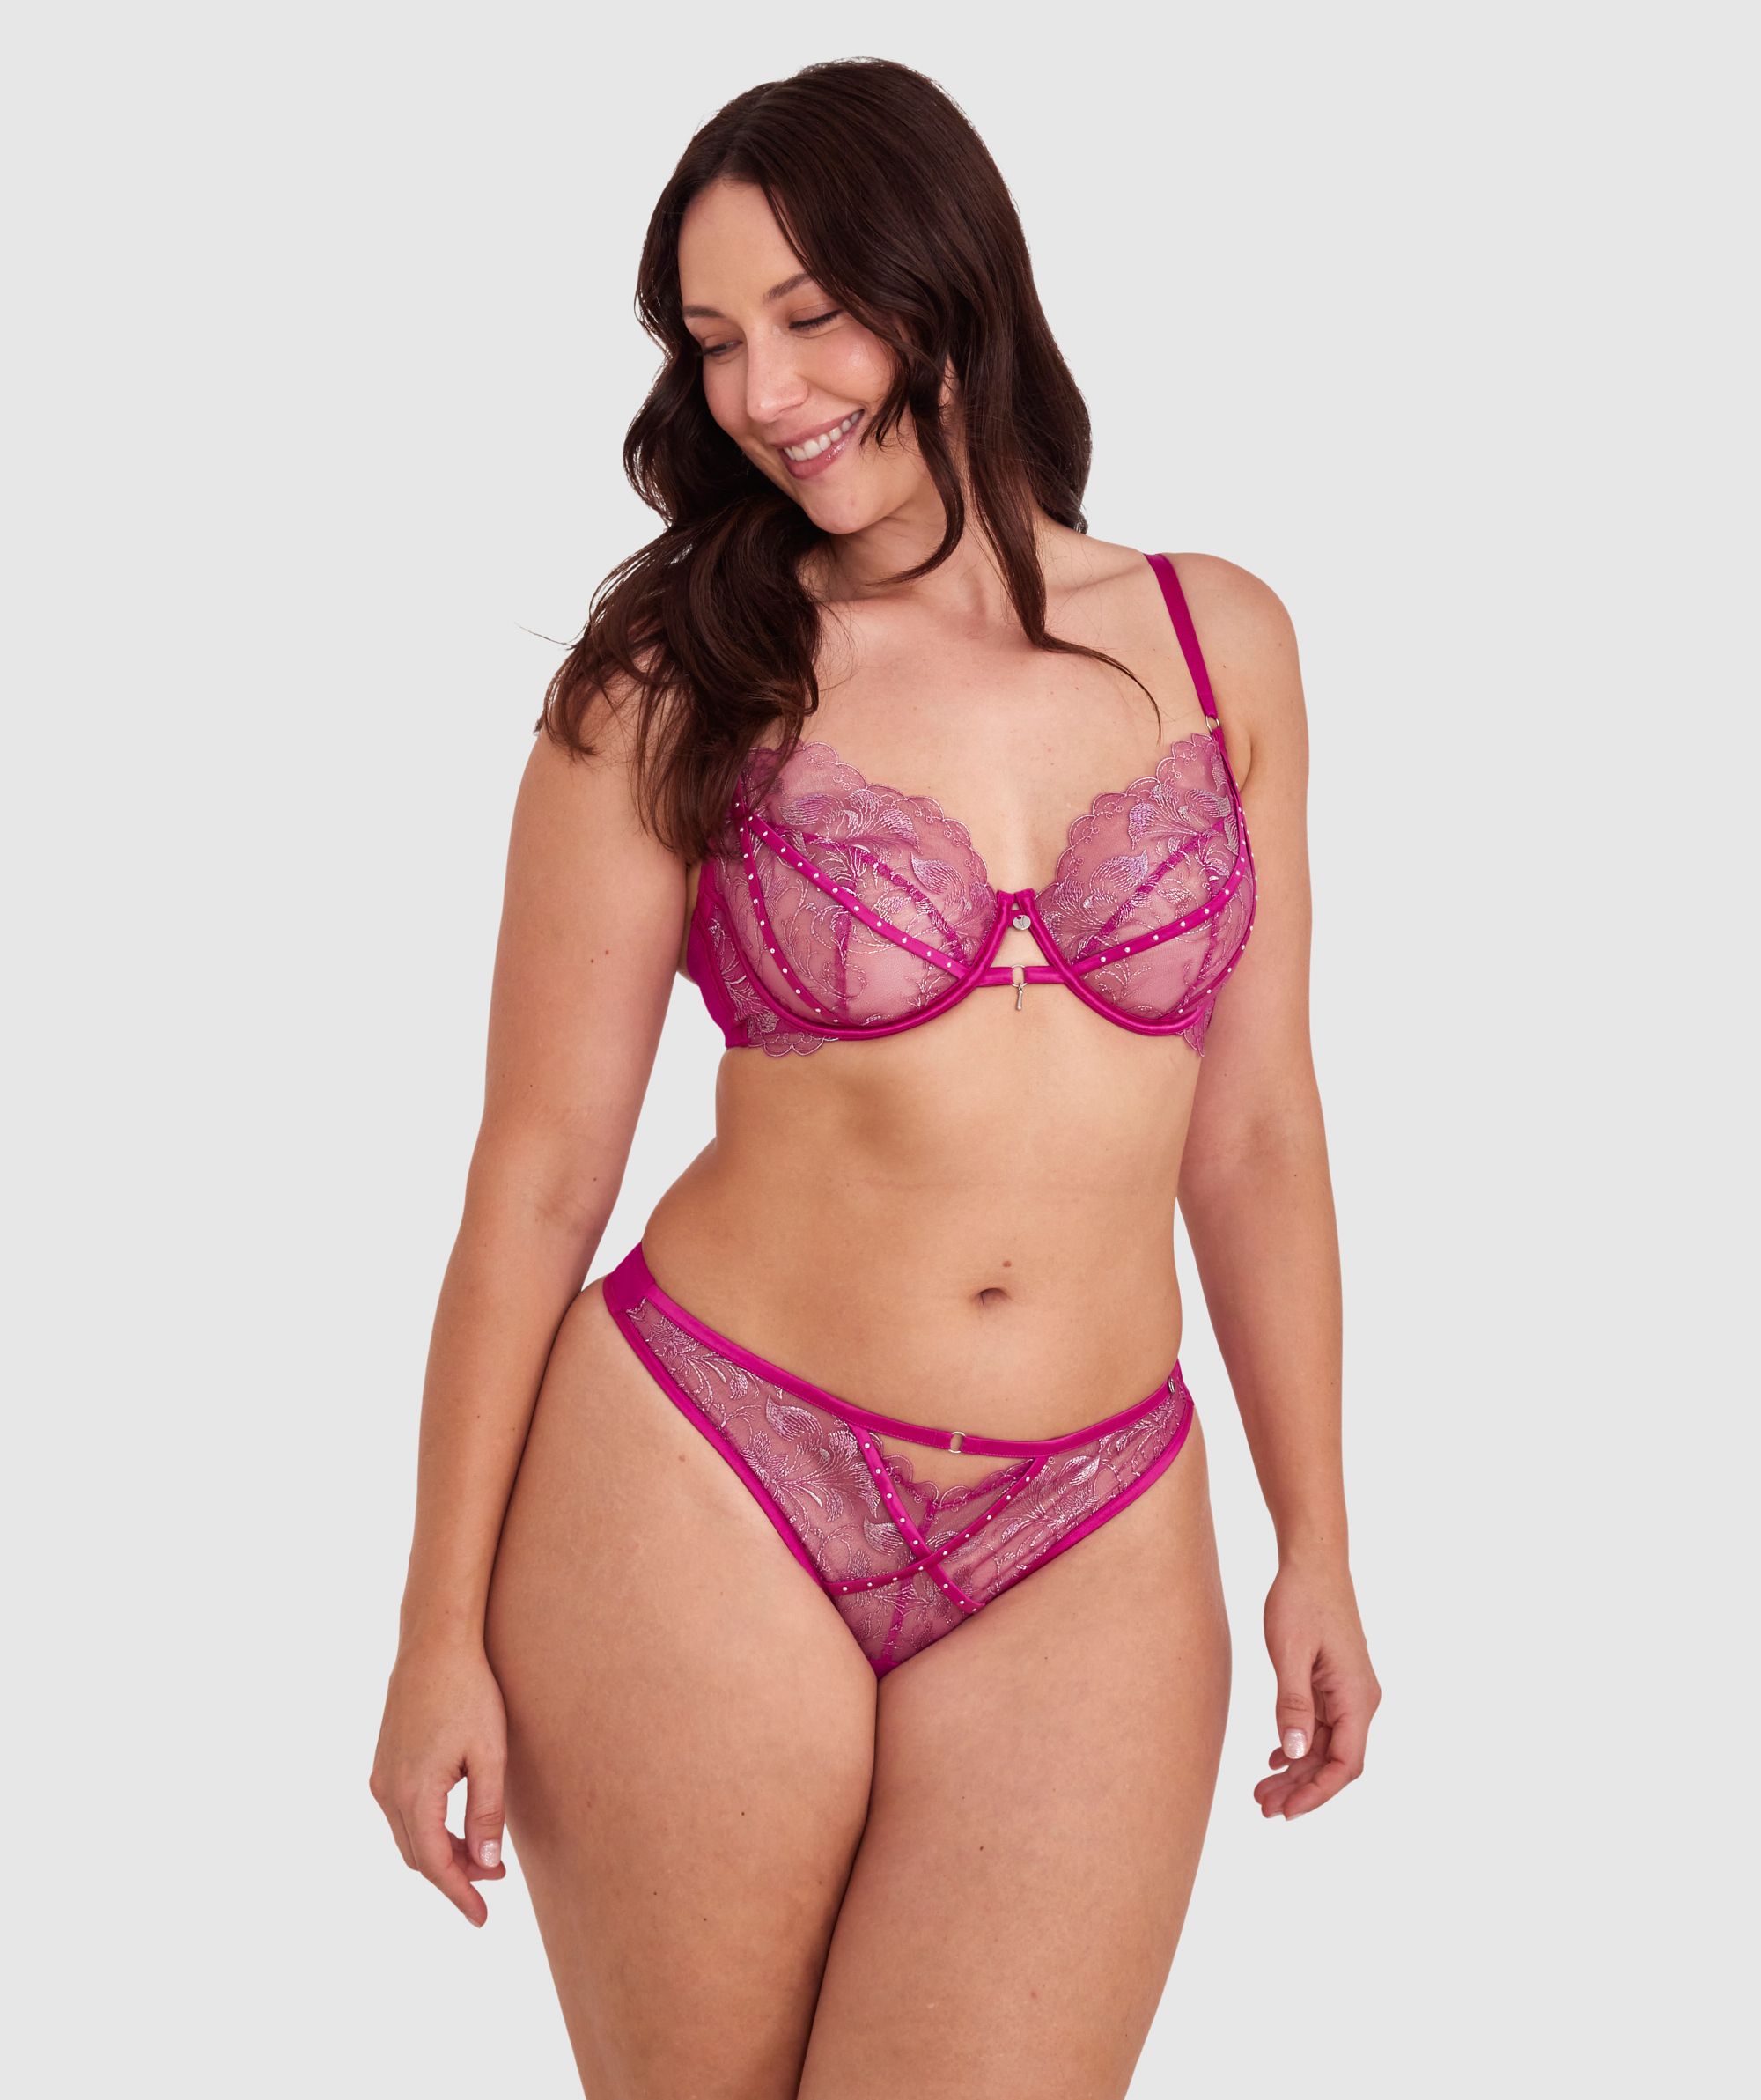 Bras N Things Vamp Showthang Full Cup Balconette Bra - Fuchsia Pink - Hyper  Pink - ShopStyle